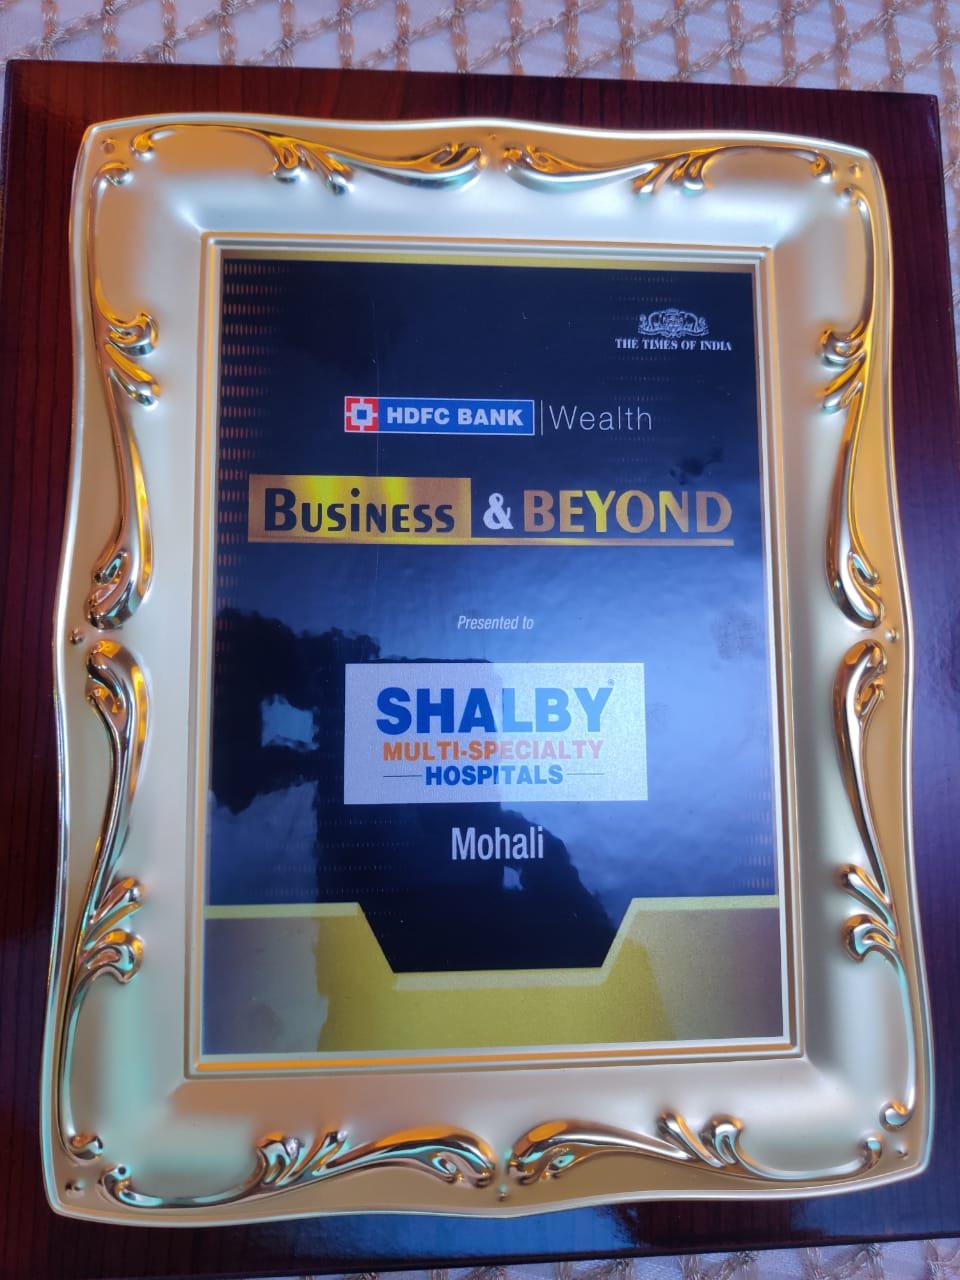 Business & Beyond Award by The Times of India - shalby hospital mohali